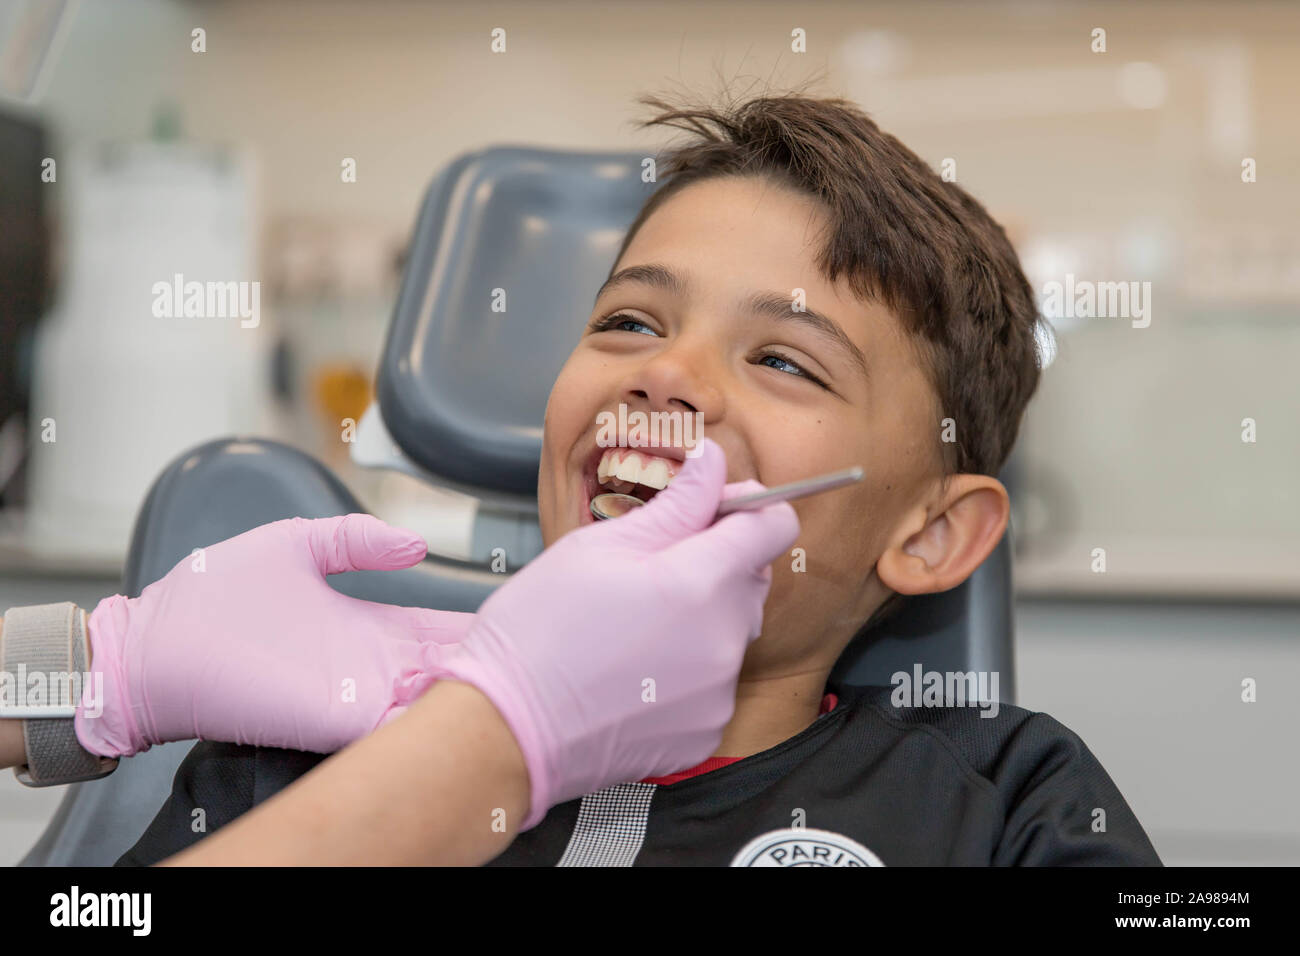 Portrait of little boy opening his mouth wide during inspection of oral cavity by dentist. Stock Photo